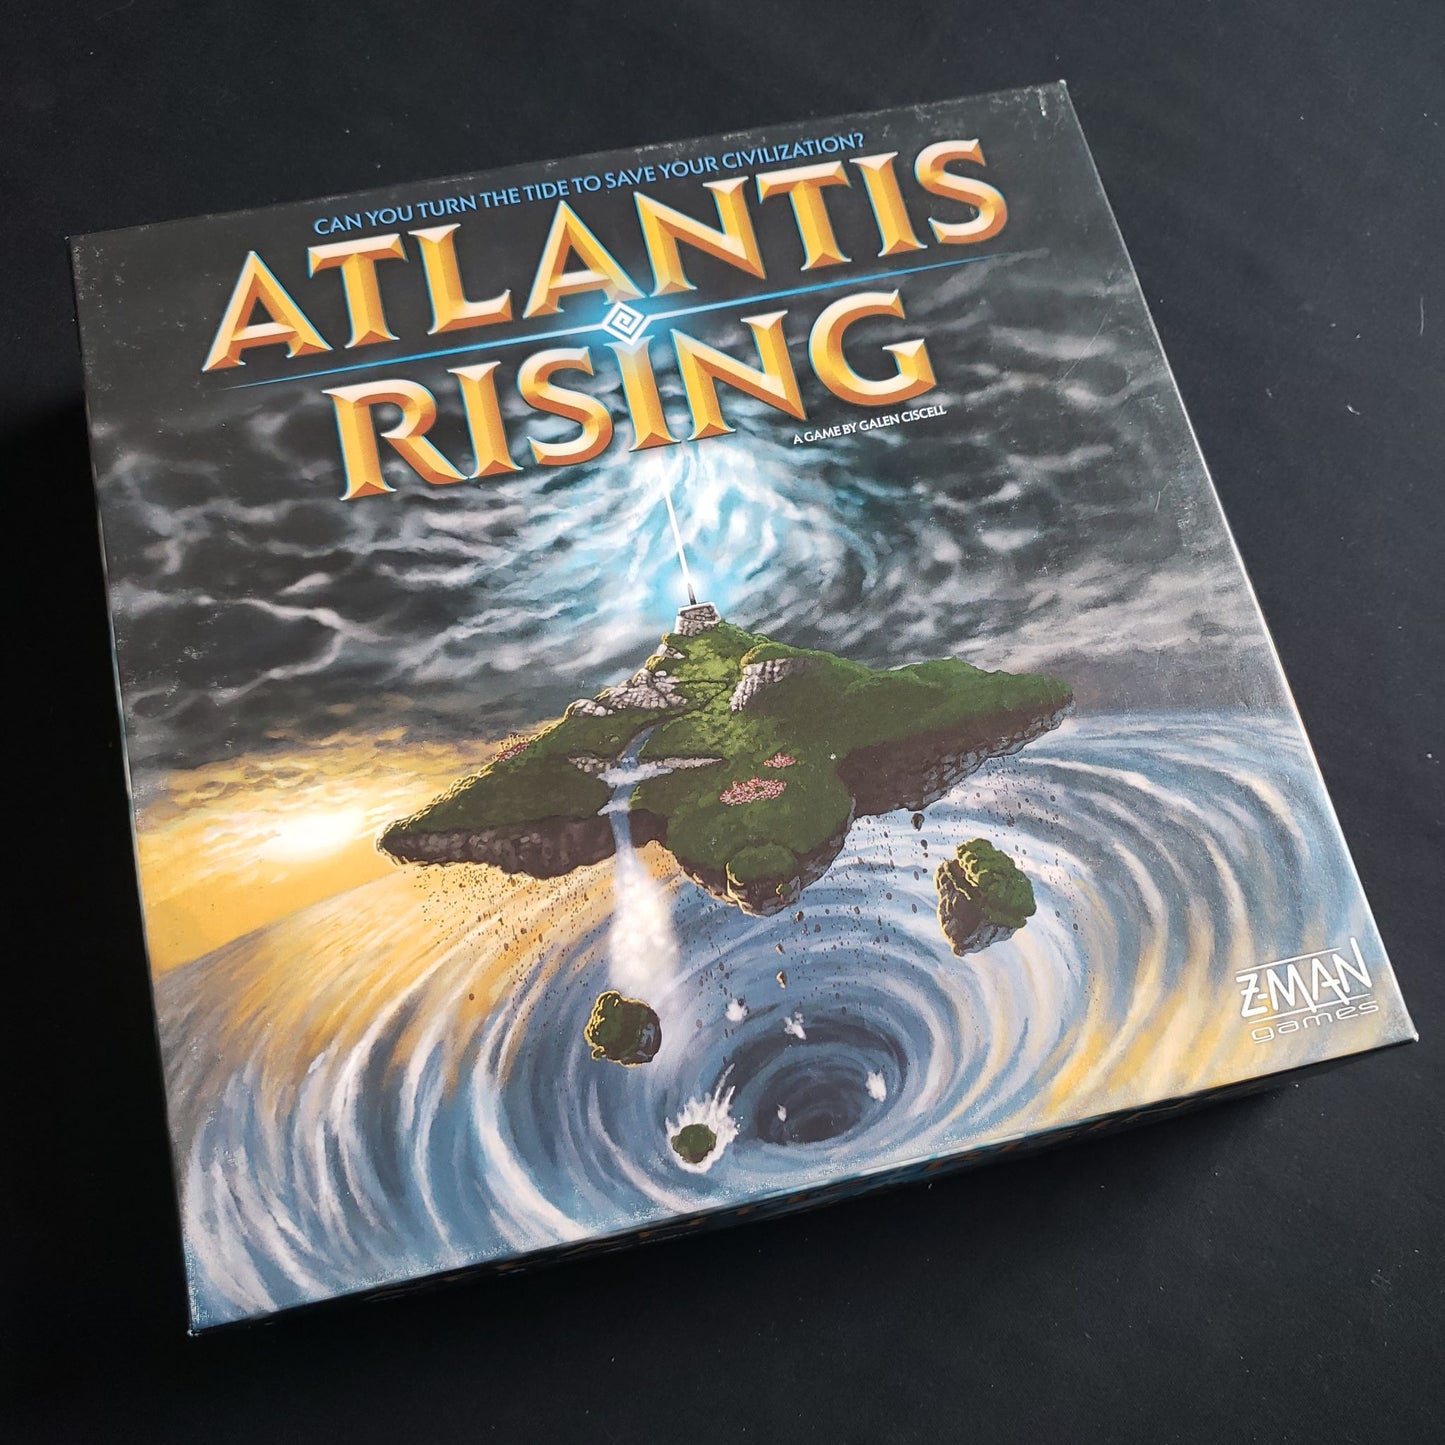 Image shows the front cover of the box of the Atlantis Rising board game